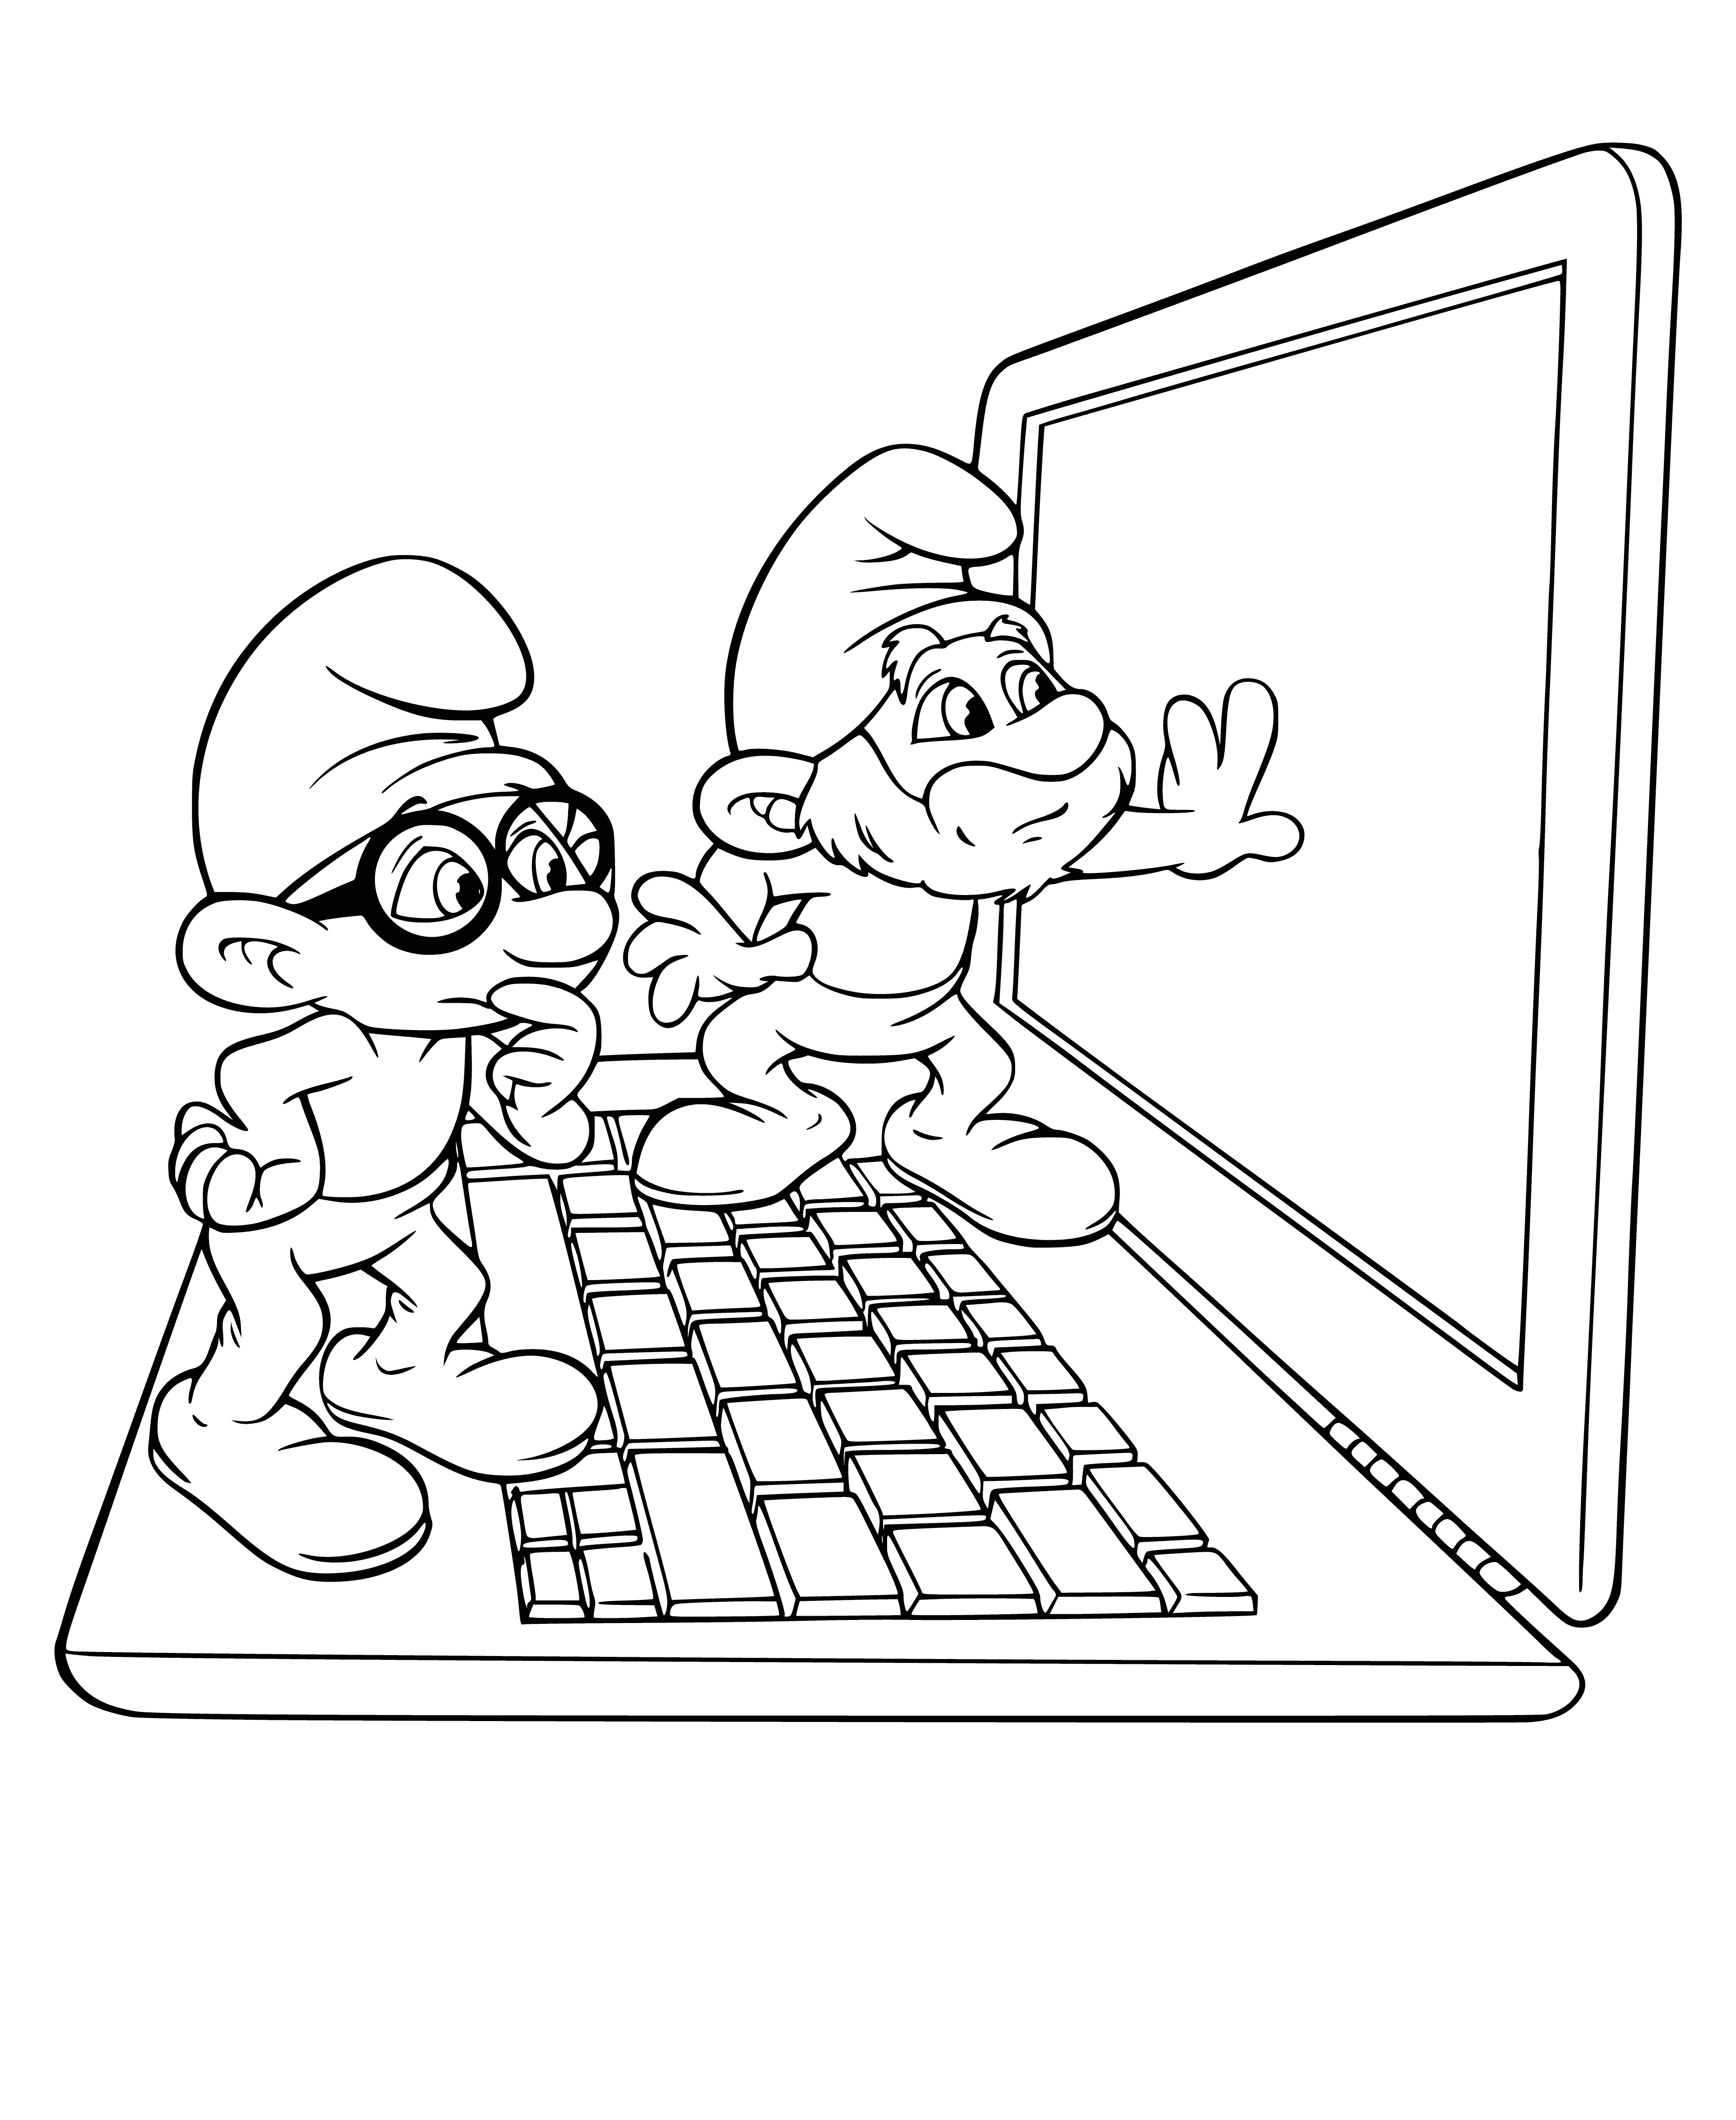 coloring page: The Smurfs are small, blue humanoids who live in mushroom-shaped houses. Led by wise Papa Smurf, each Smurf has an important role. Pope and Prudent Smurf help keep peace and maintain order in their village.